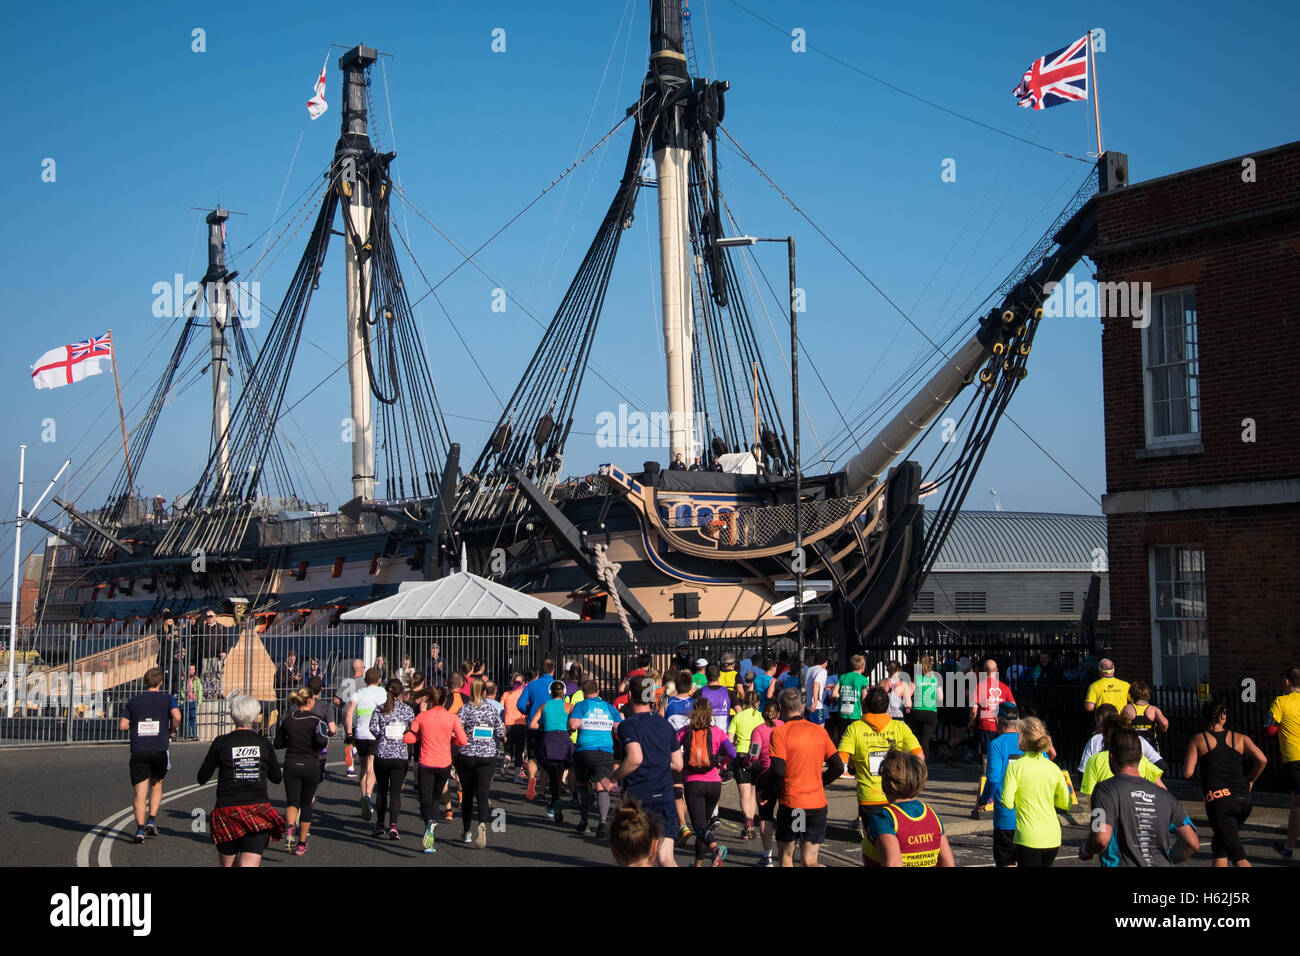 Portsmouth, UK. 23rd October, 2016.  Runners pass HMS VIctory as thousands of runners are taking part in the 2016 Great South Run in the waterfront city of Portsmouth today, 23rd October 2016. The 10 mile road running event is hailed as the world's greatest 10-mile race by event organisers, and is a fast and flat course that starts and finishes in Southsea.  Photo credit: Rob Arnold/Alamy Live News Stock Photo